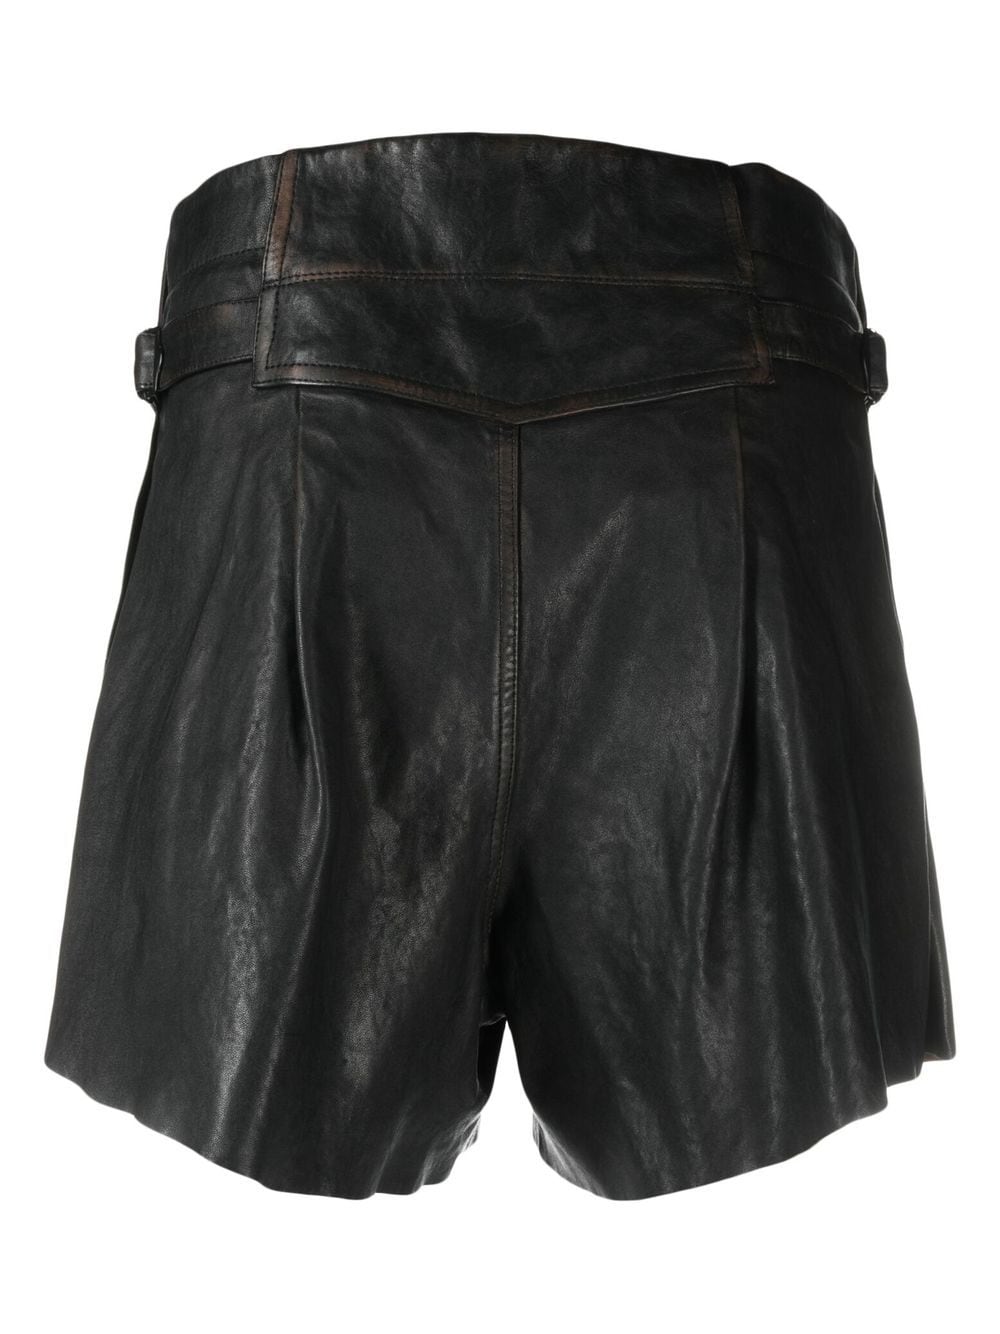 Image 2 of The Mannei patent leather shorts